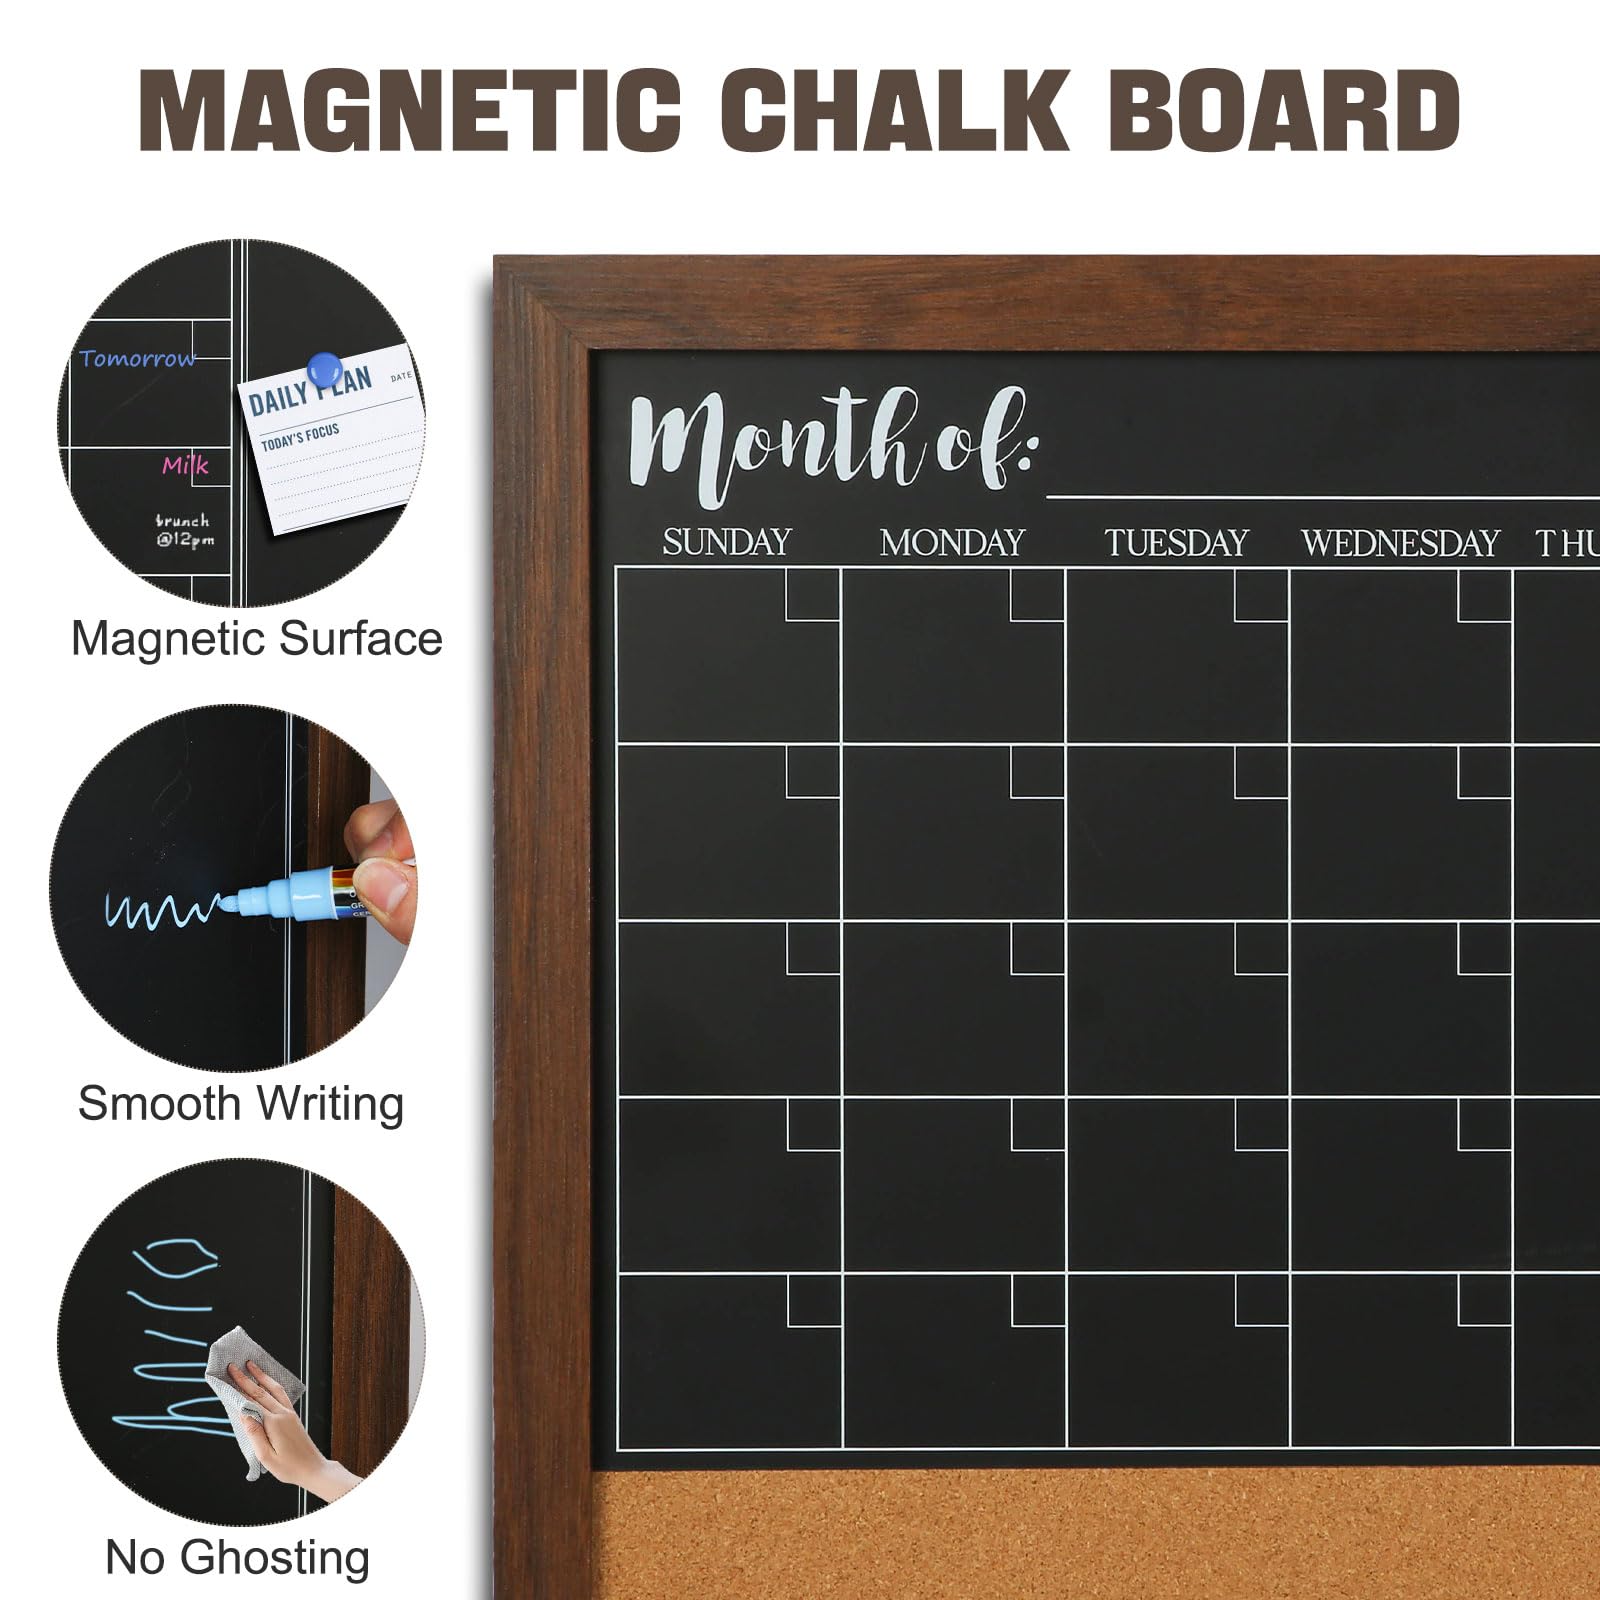 4 THOUGHT Chalkboard Calendar Corkboard Combo, 18" x 24" Bulletin Board Magnetic Calendar Chalkboard for Wall Combination Board Monthly Planner Rustic Brown Frame 2 Markers 6 Magnets 4 Pushpins